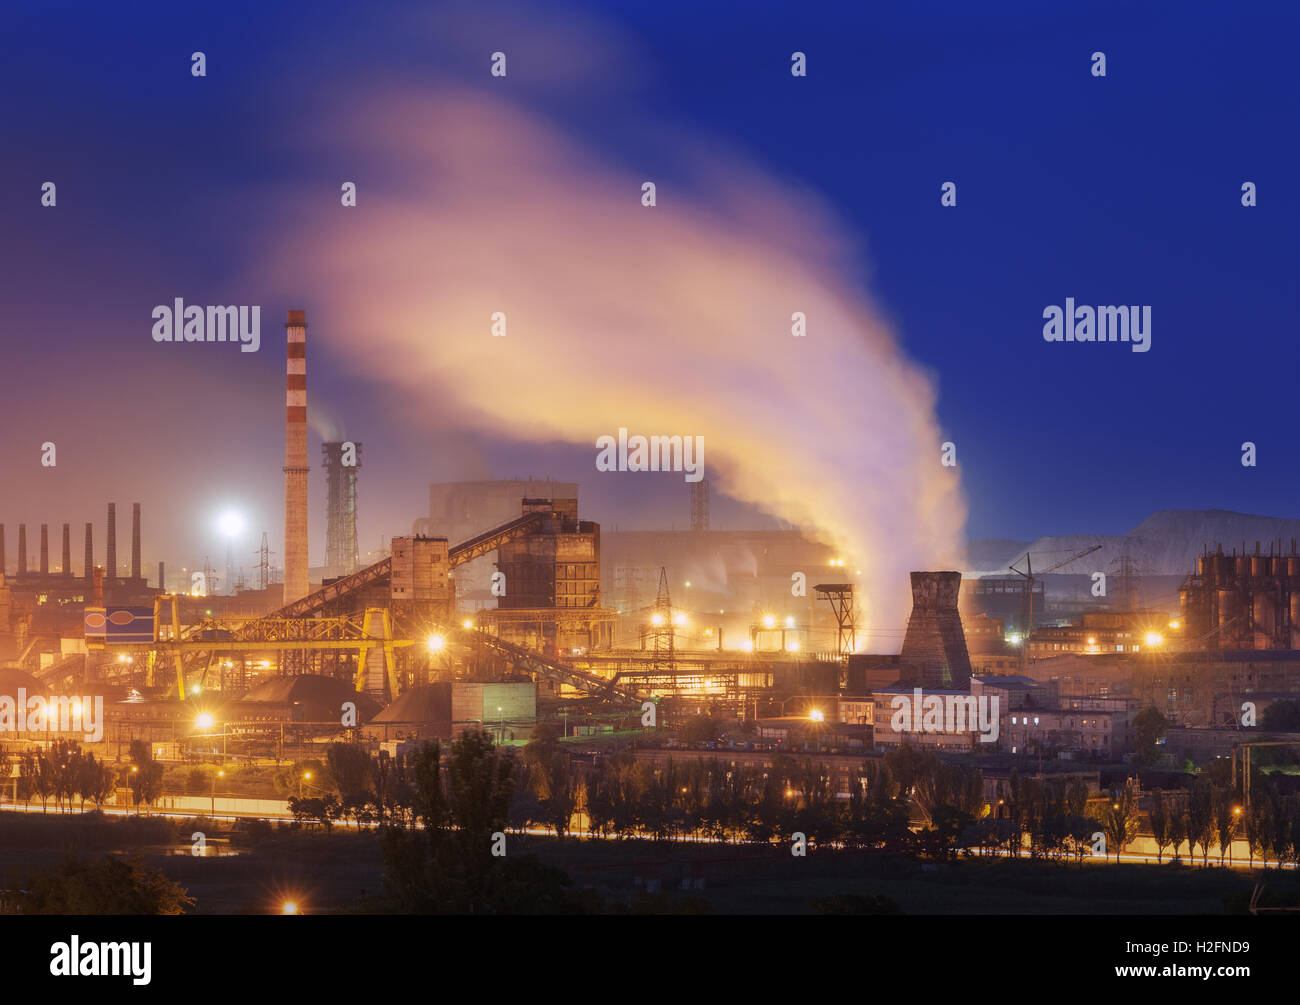 Metallurgical plant at night. Steel factory with smokestacks. Steelworks, iron works. Heavy industry in Europe. Air pollution fr Stock Photo